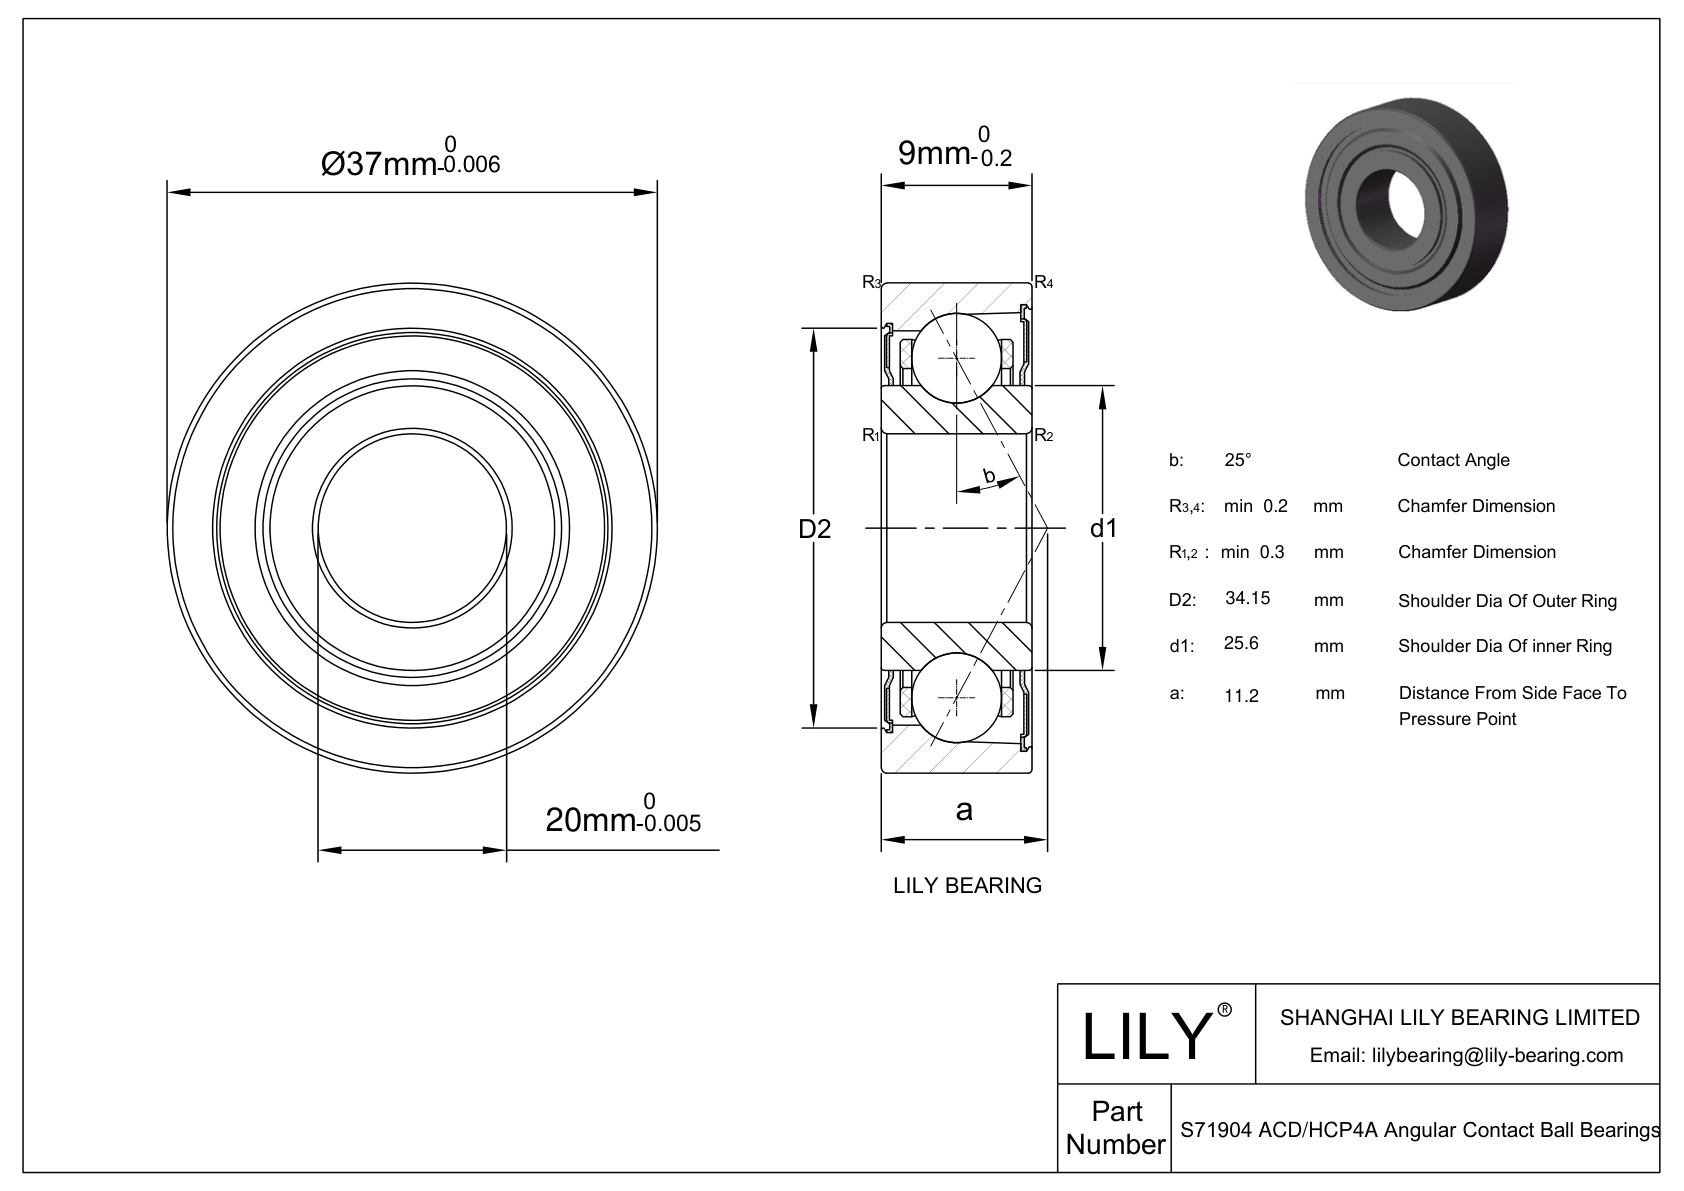 S71904 ACD/HCP4A Super Precision Angular Contact Ball Bearings cad drawing